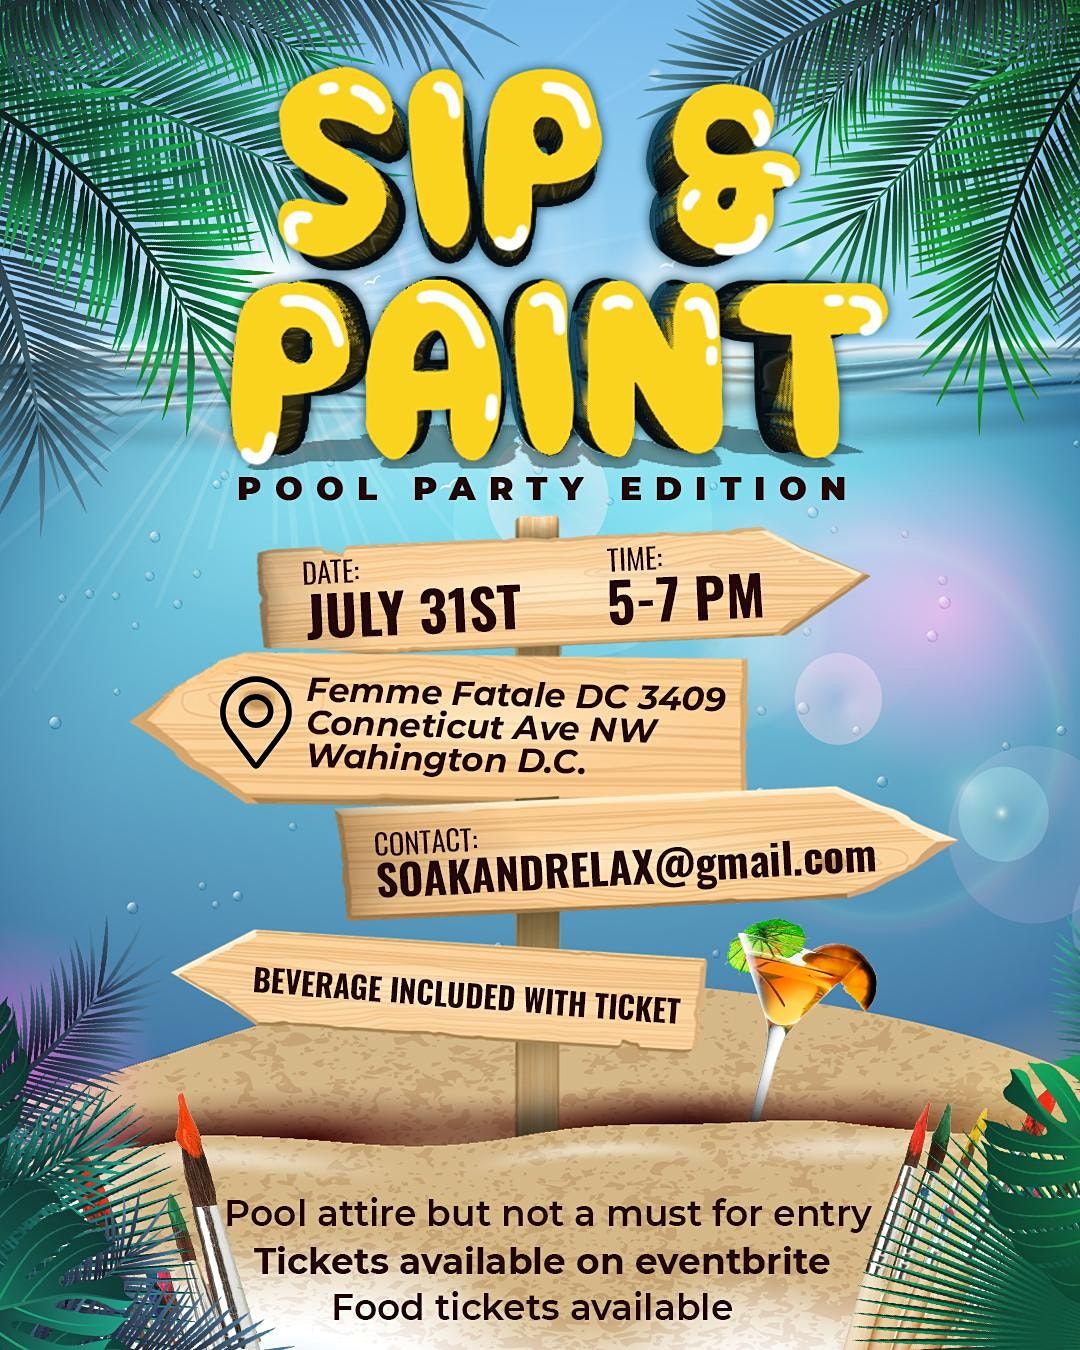 Sip & Paint Pool Party edition with Soak & Relax